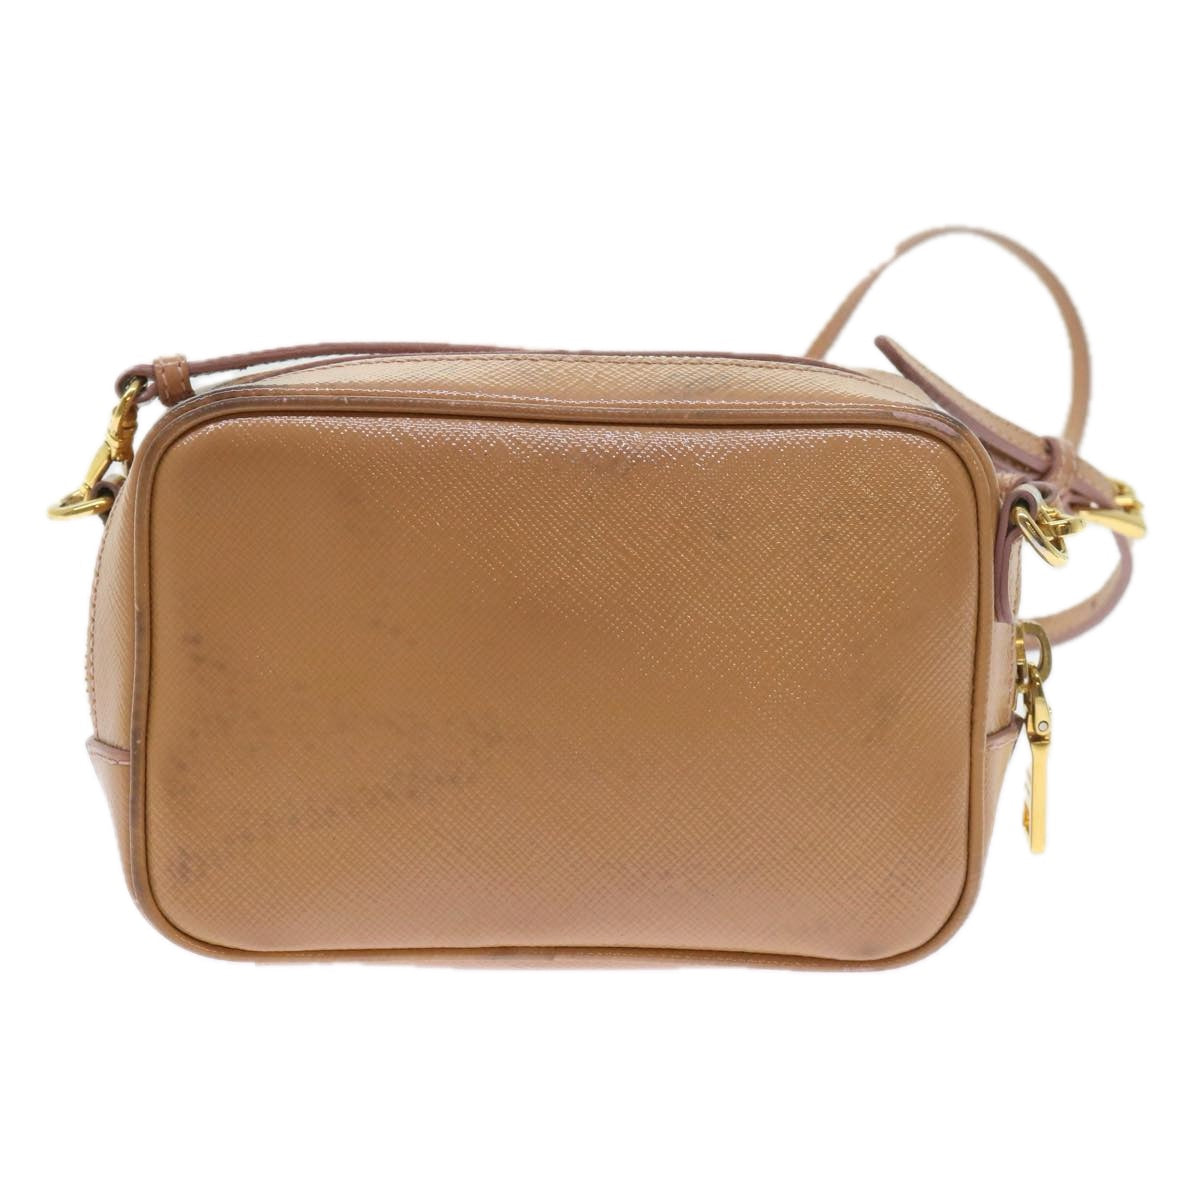 PRADA Shoulder Pouch Safiano leather Beige Auth bs9707 - 0